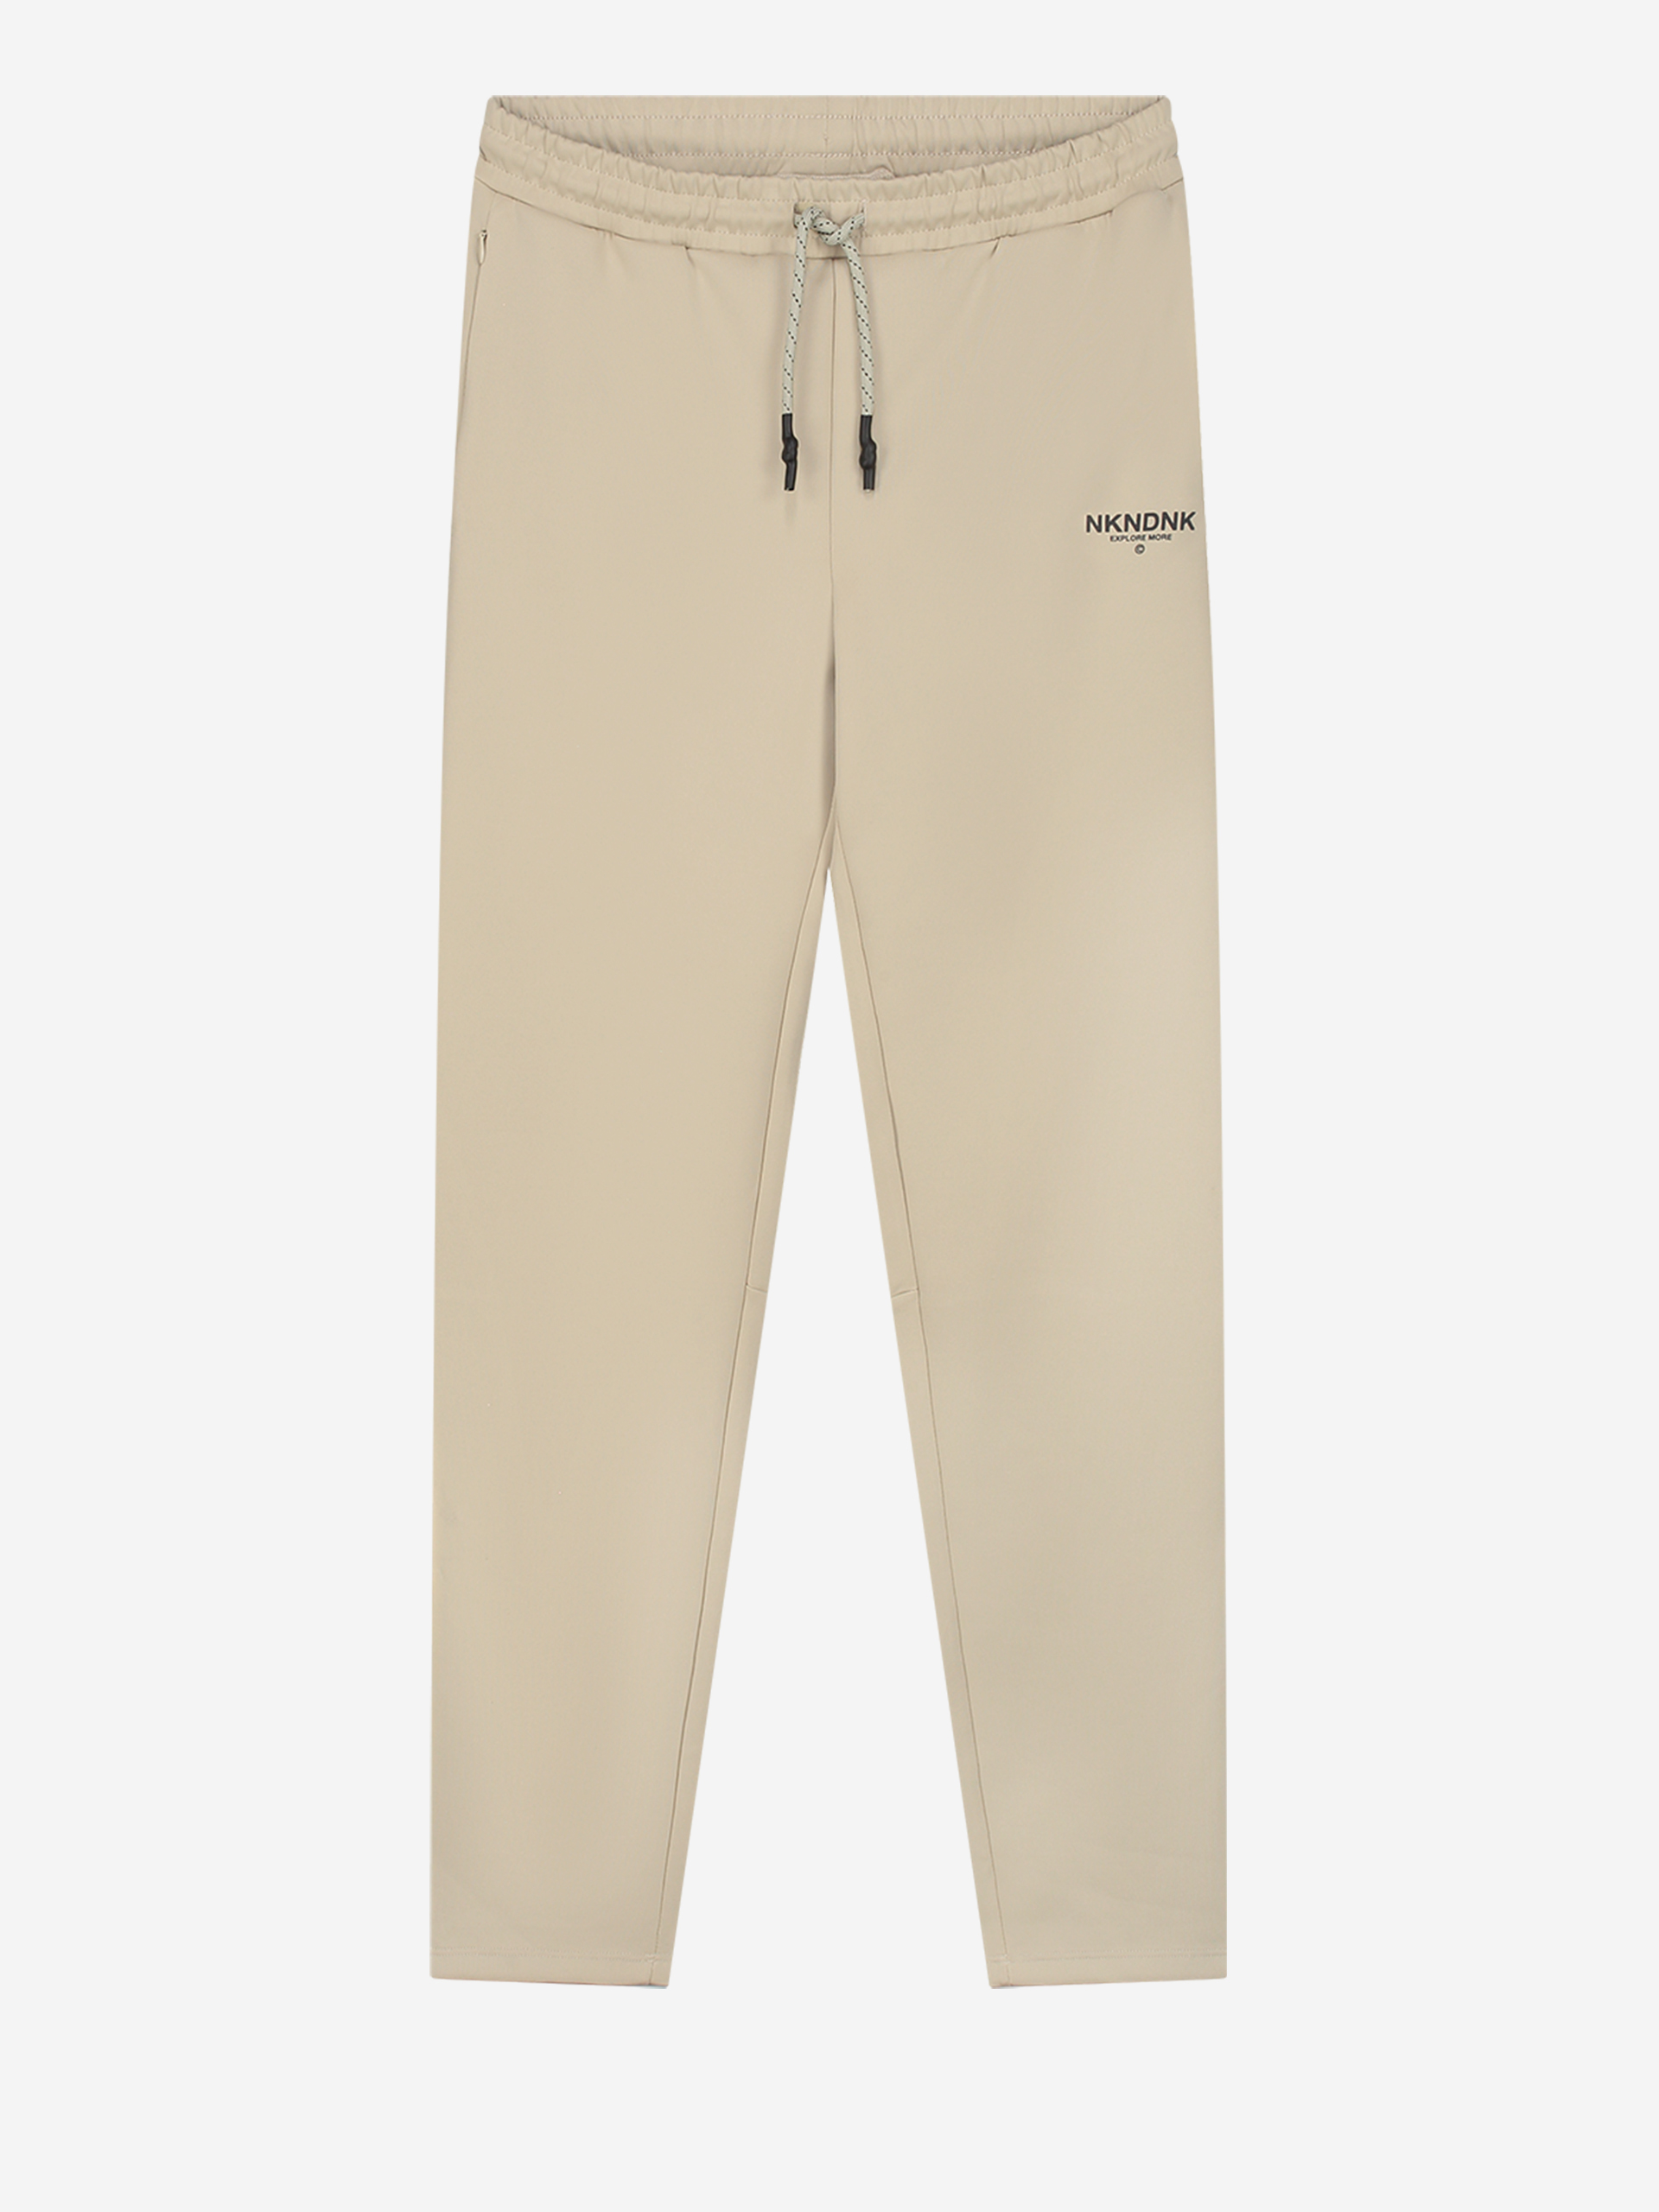 Pants with mid rise and cord